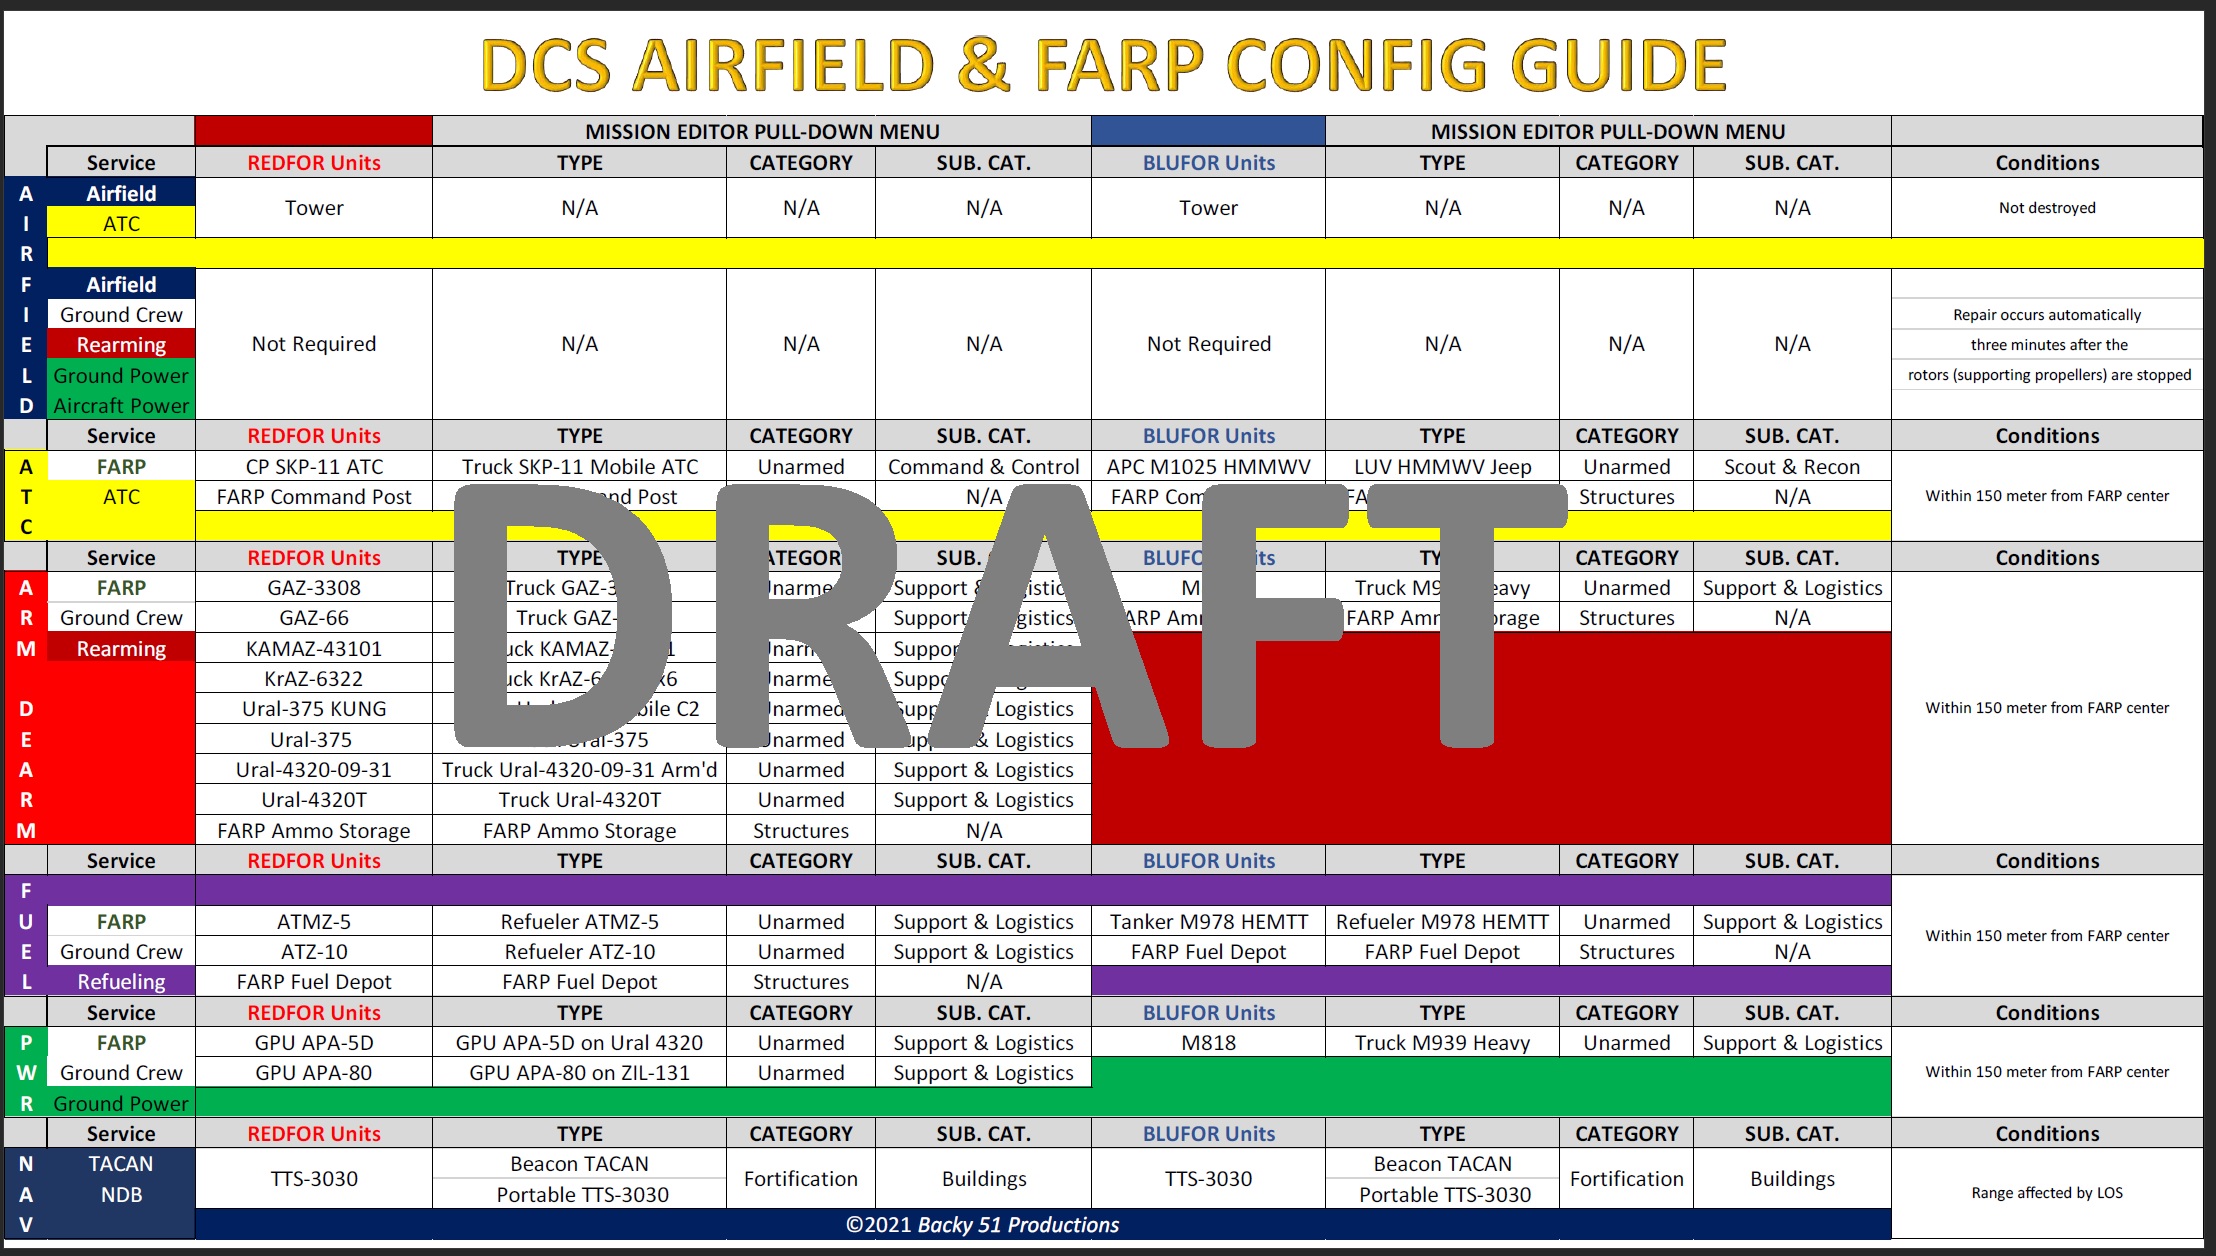 DCS AIRFIELD & FARP CONFIGURATION GUIDE and C2 TEST